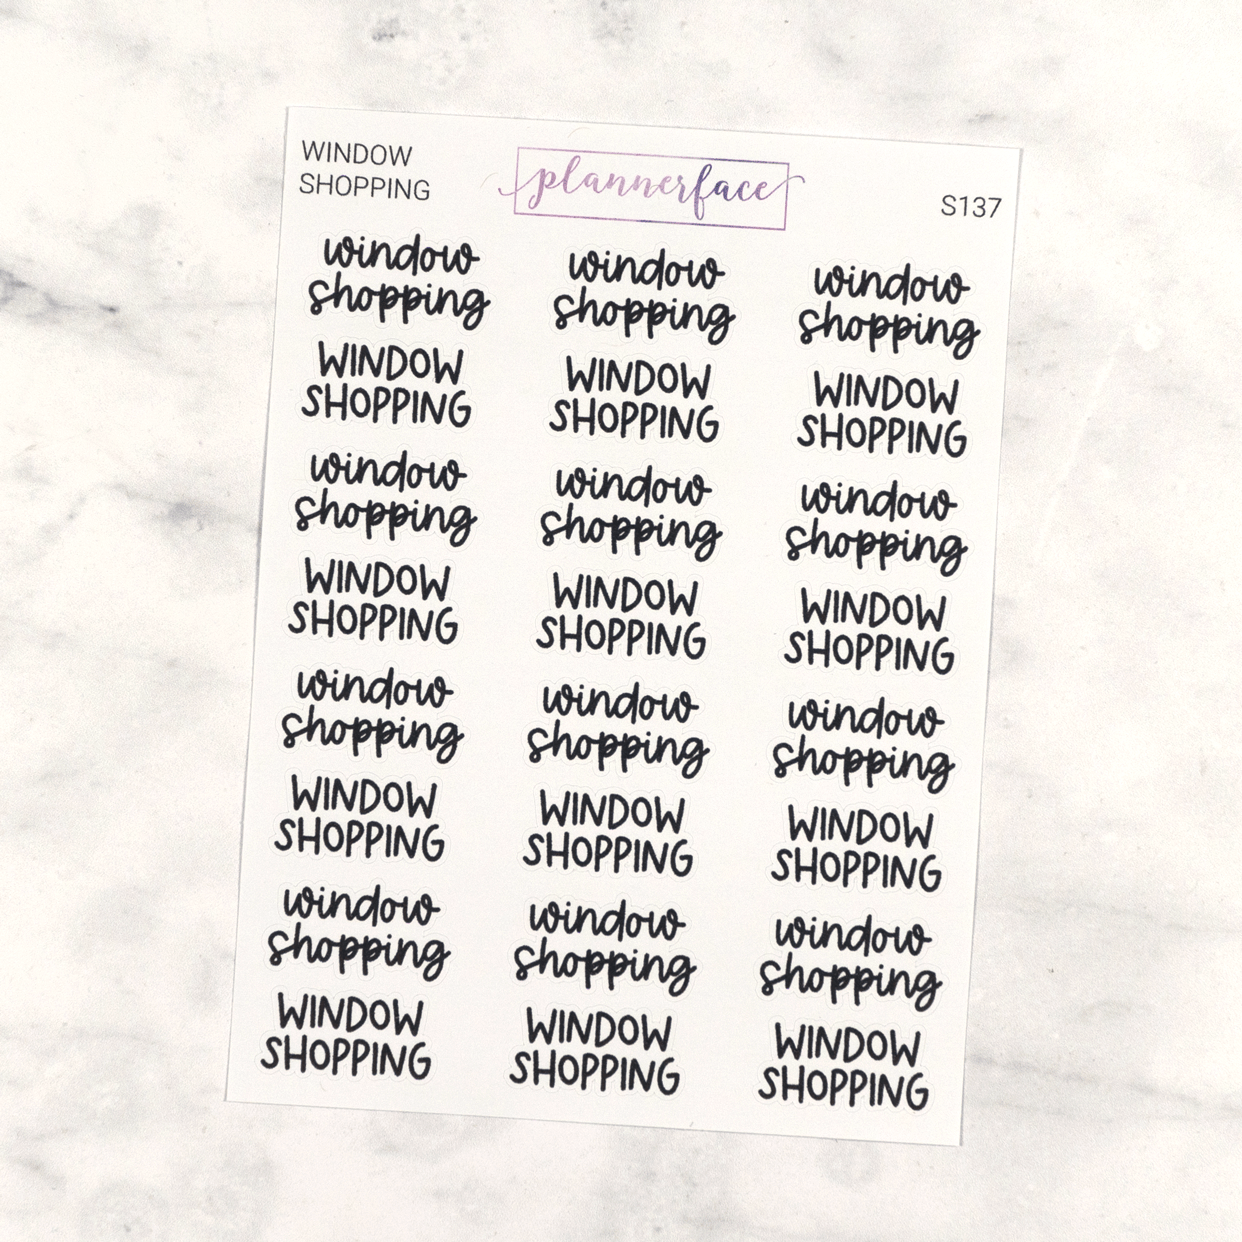 Window Shopping | Scripts by Plannerface